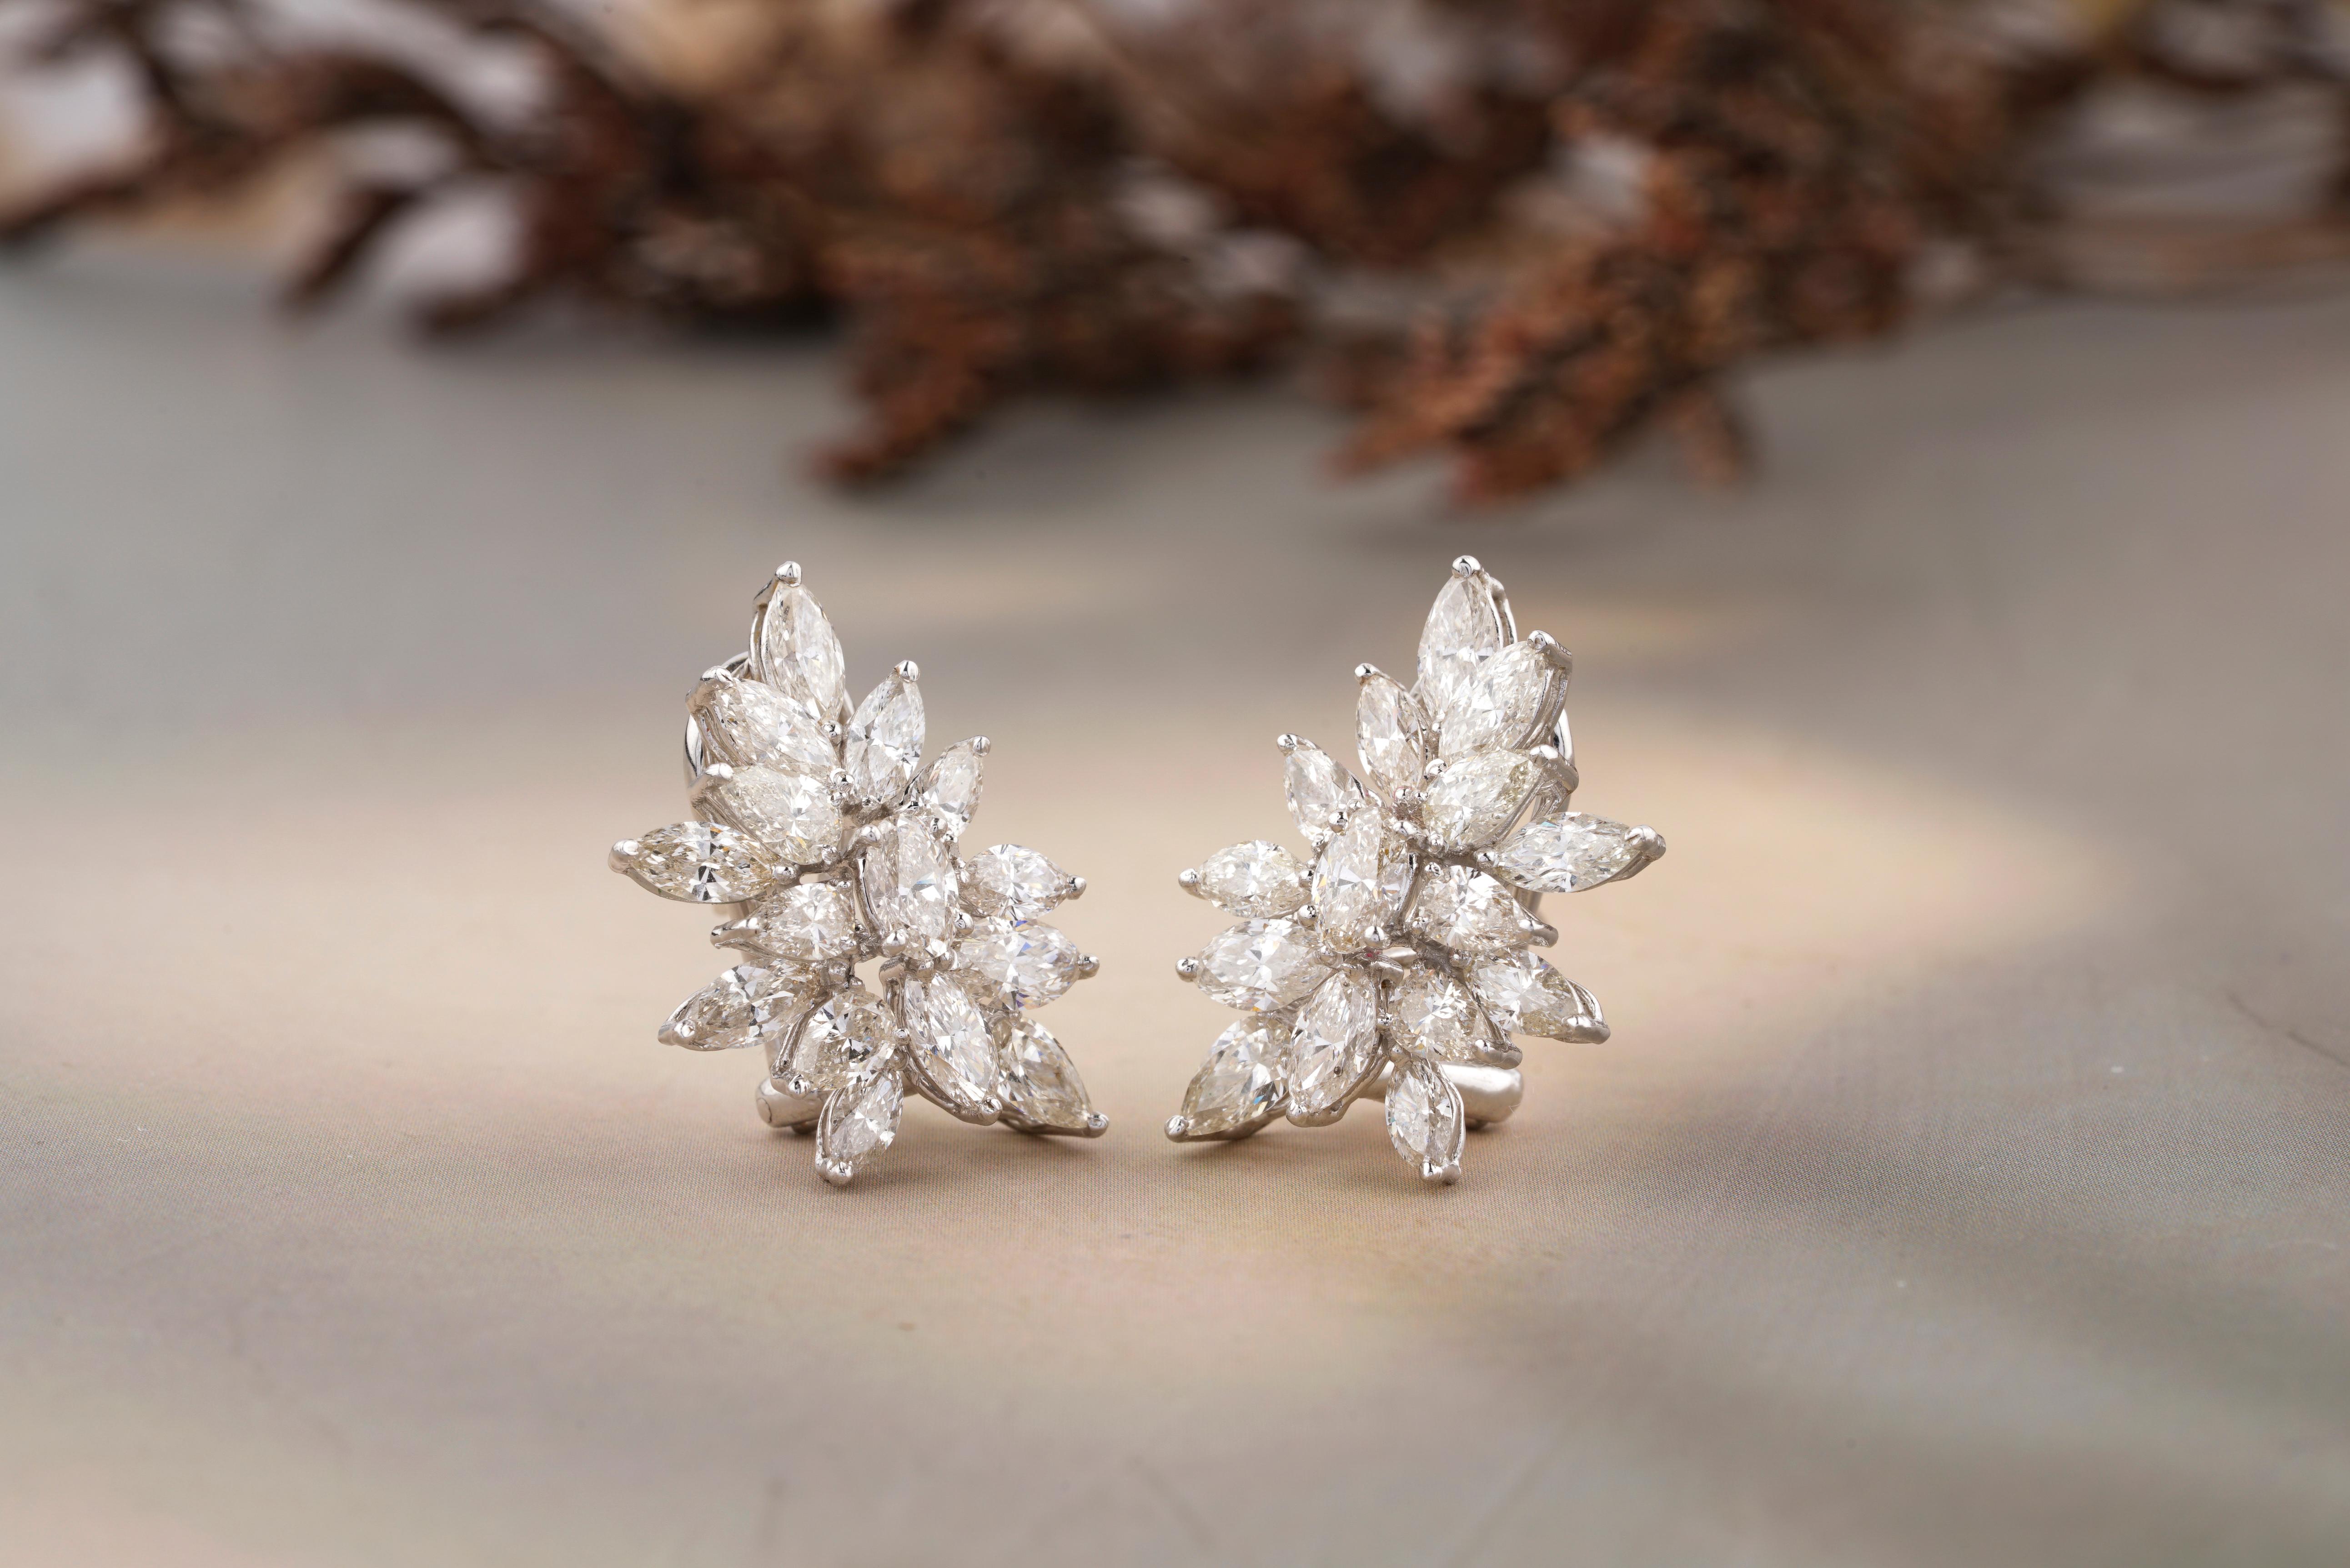 Elevate your elegance with these breathtaking diamond earrings featuring dangling pearls. Designed to perfection, these earrings showcase a stunning array of marquise-cut, oval and pear-cut diamonds arranged in a floral motif, accented by delicate